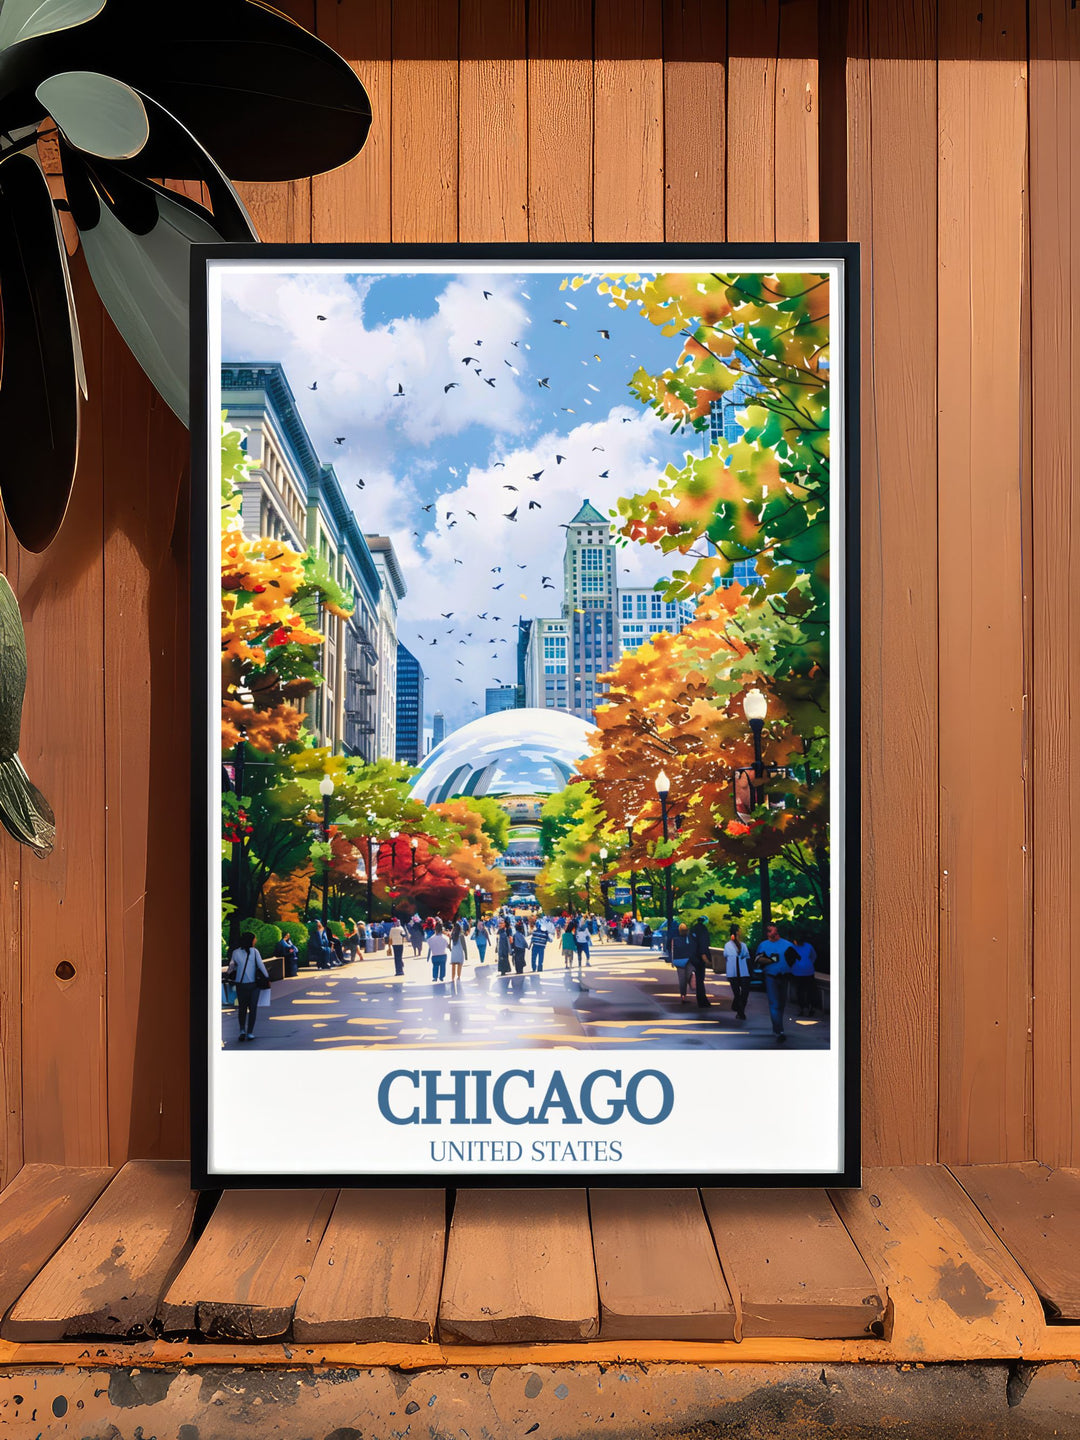 This travel poster of Chicago captures the vibrant atmosphere of Millennium Park, perfect for adding a touch of urban charm to your decor. Featuring the iconic Cloud Gate, this poster brings the modern elegance of Chicago into your home.